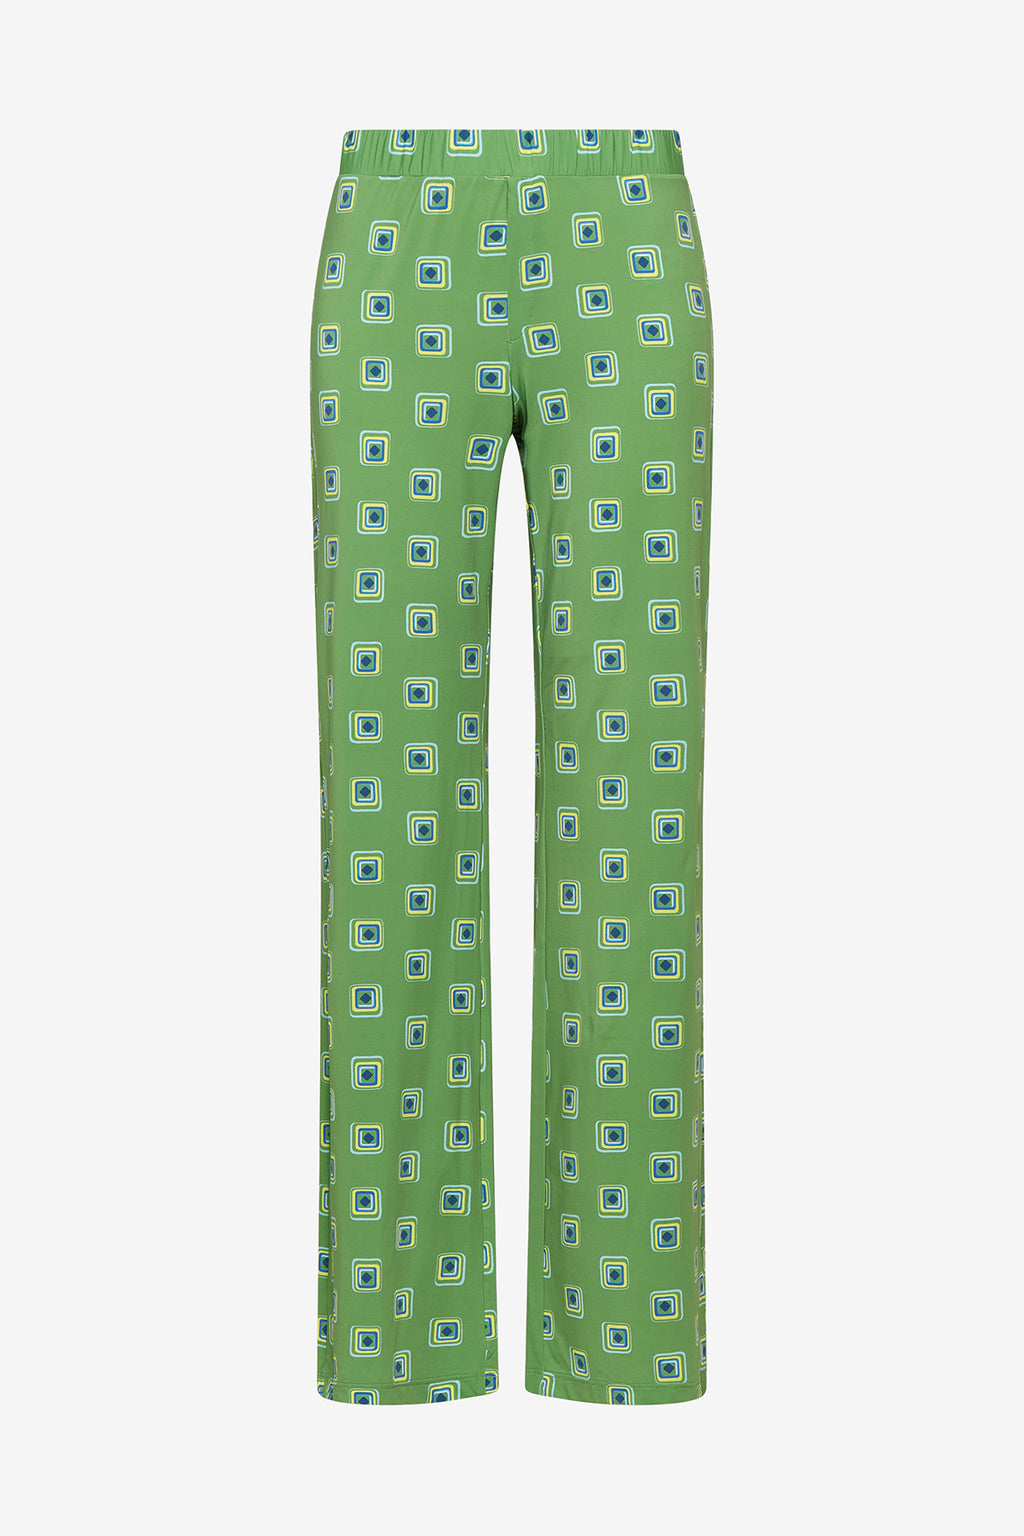 green MARIGOLD jersey trousers